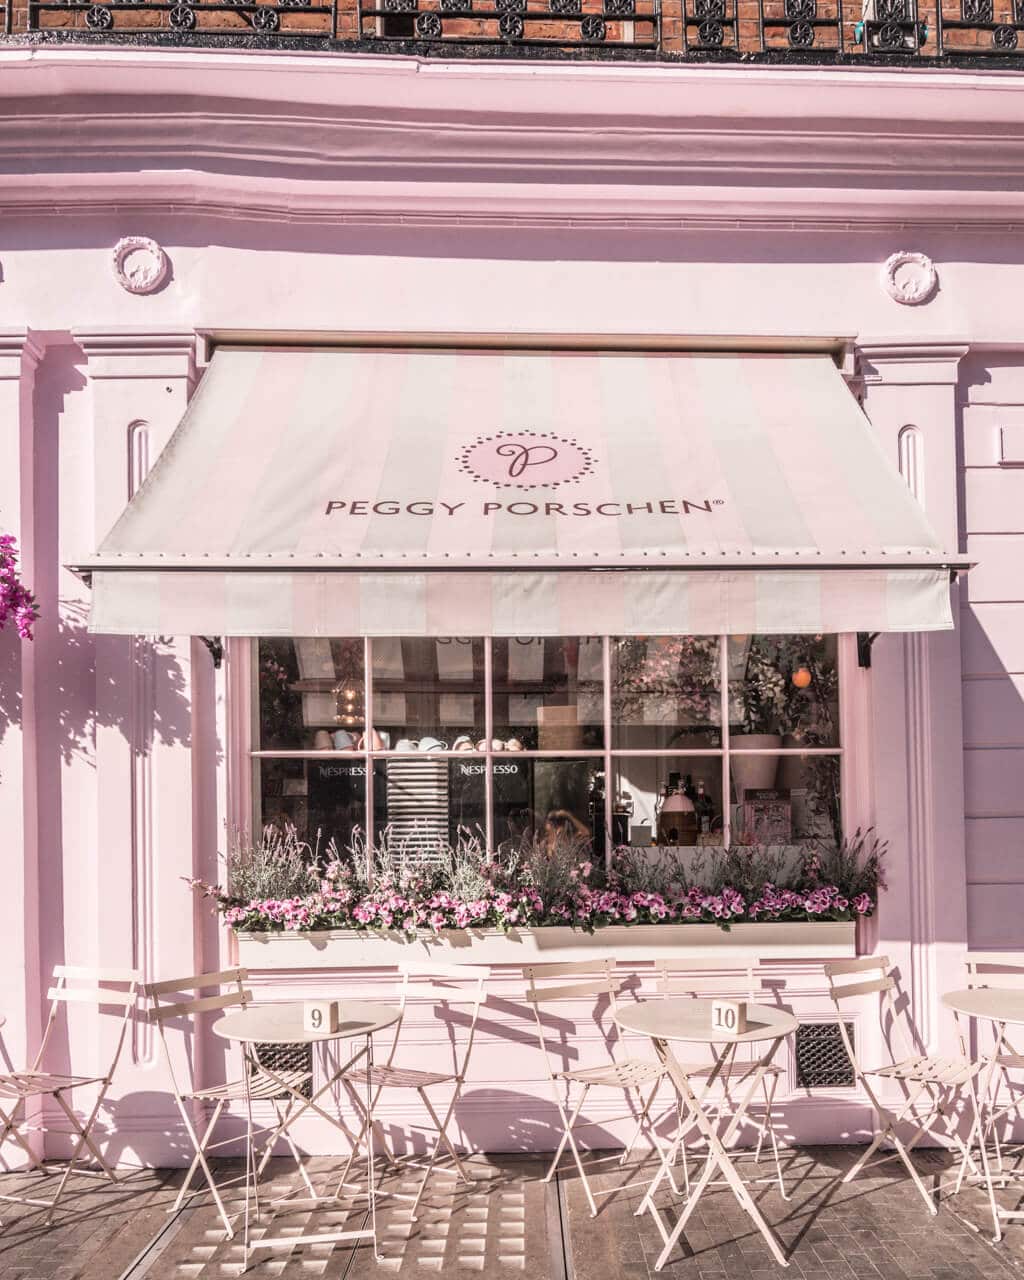 London food guide - my recommendations for restaurants and street food in the capital of England. | PEGGY PORSCHEN CAKES